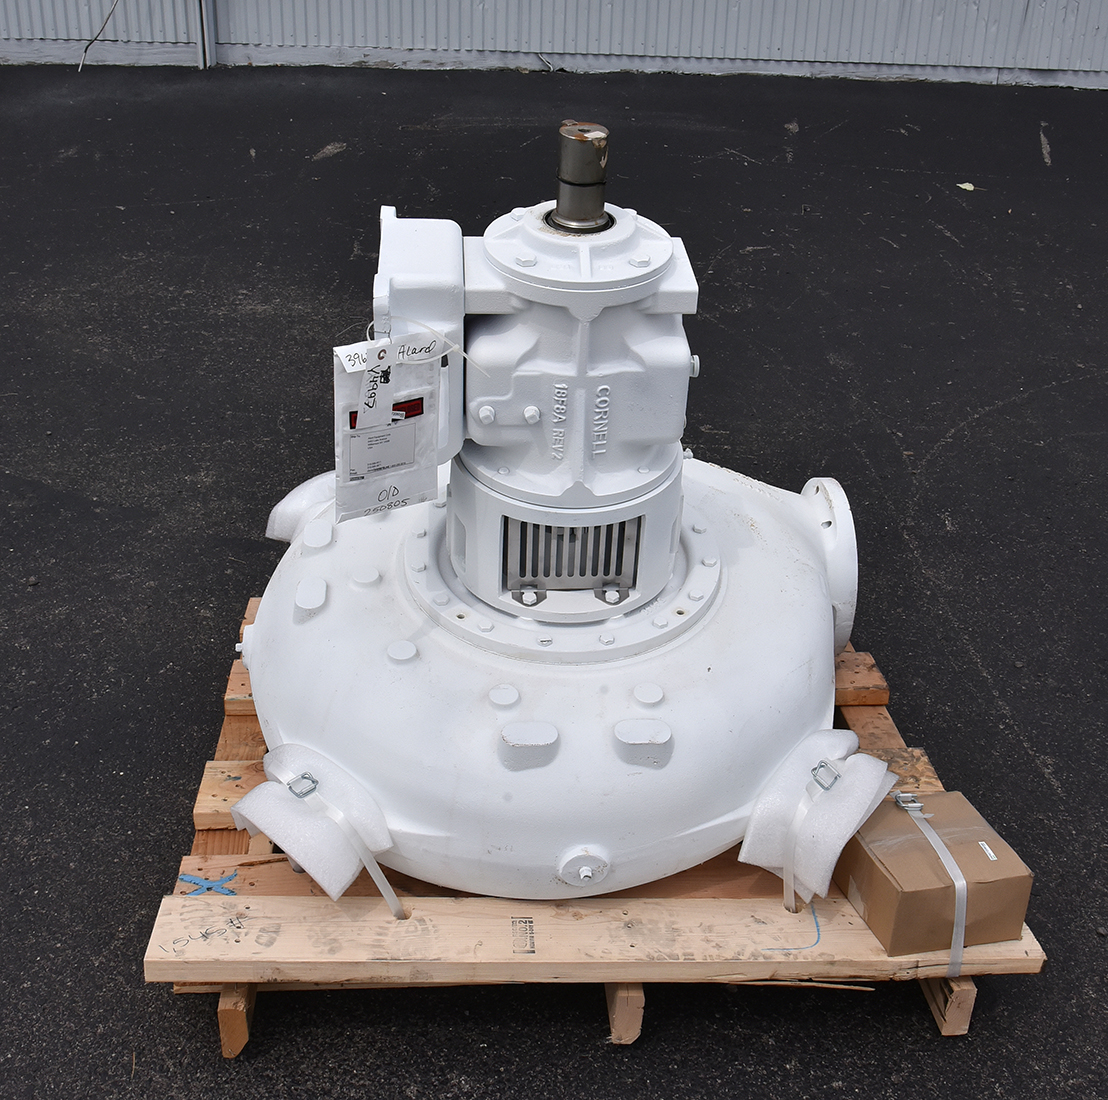 Cornell FOOD PUMP, 8 inch delicate product model 8NHPP-F18K, new in stock at Alard, item Y4997